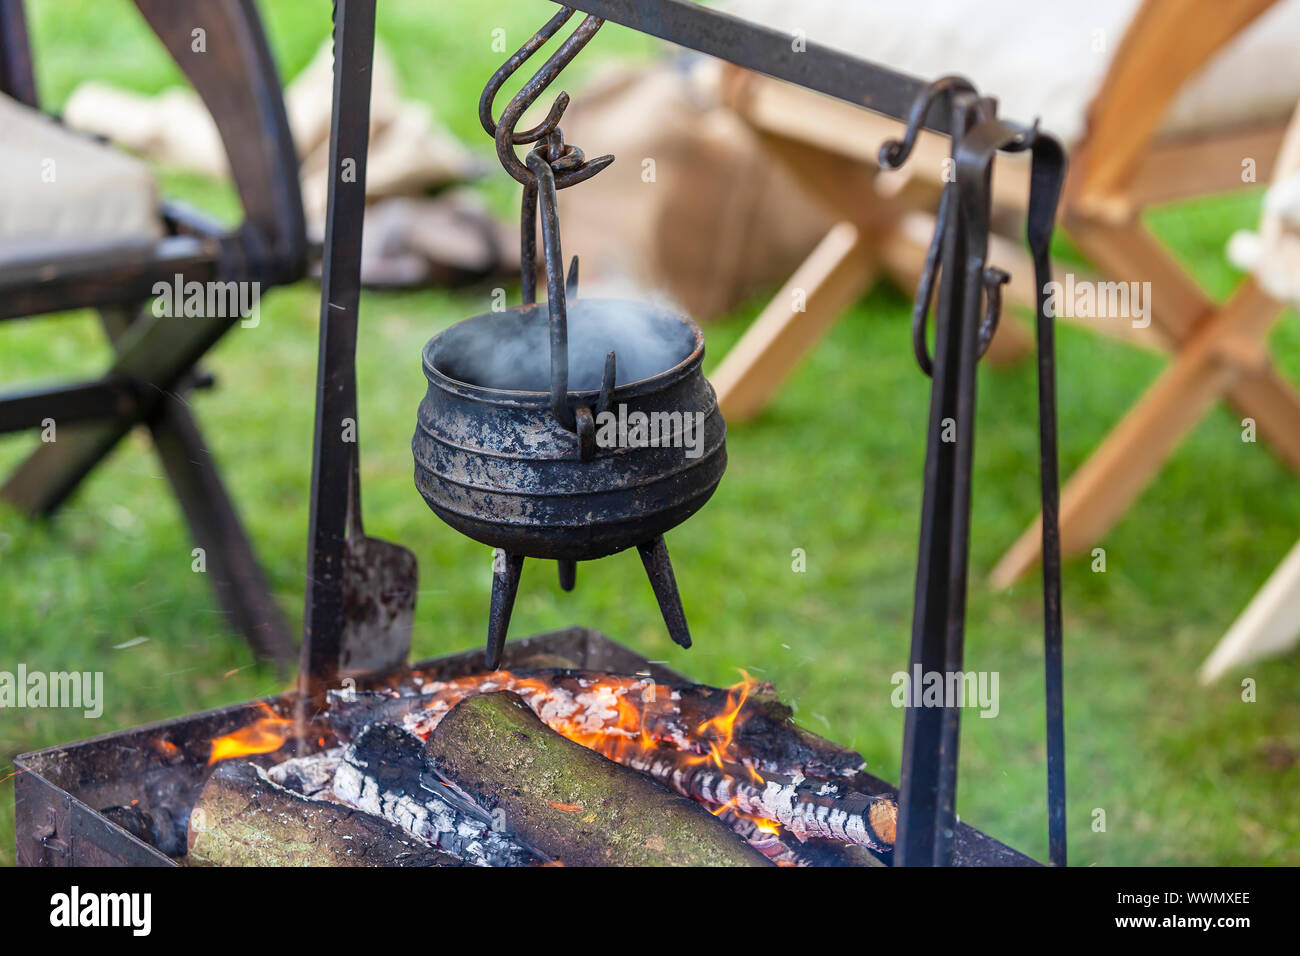 https://c8.alamy.com/comp/WWMXEE/rusty-old-cooking-pot-simmering-over-open-fire-at-a-campsite-WWMXEE.jpg